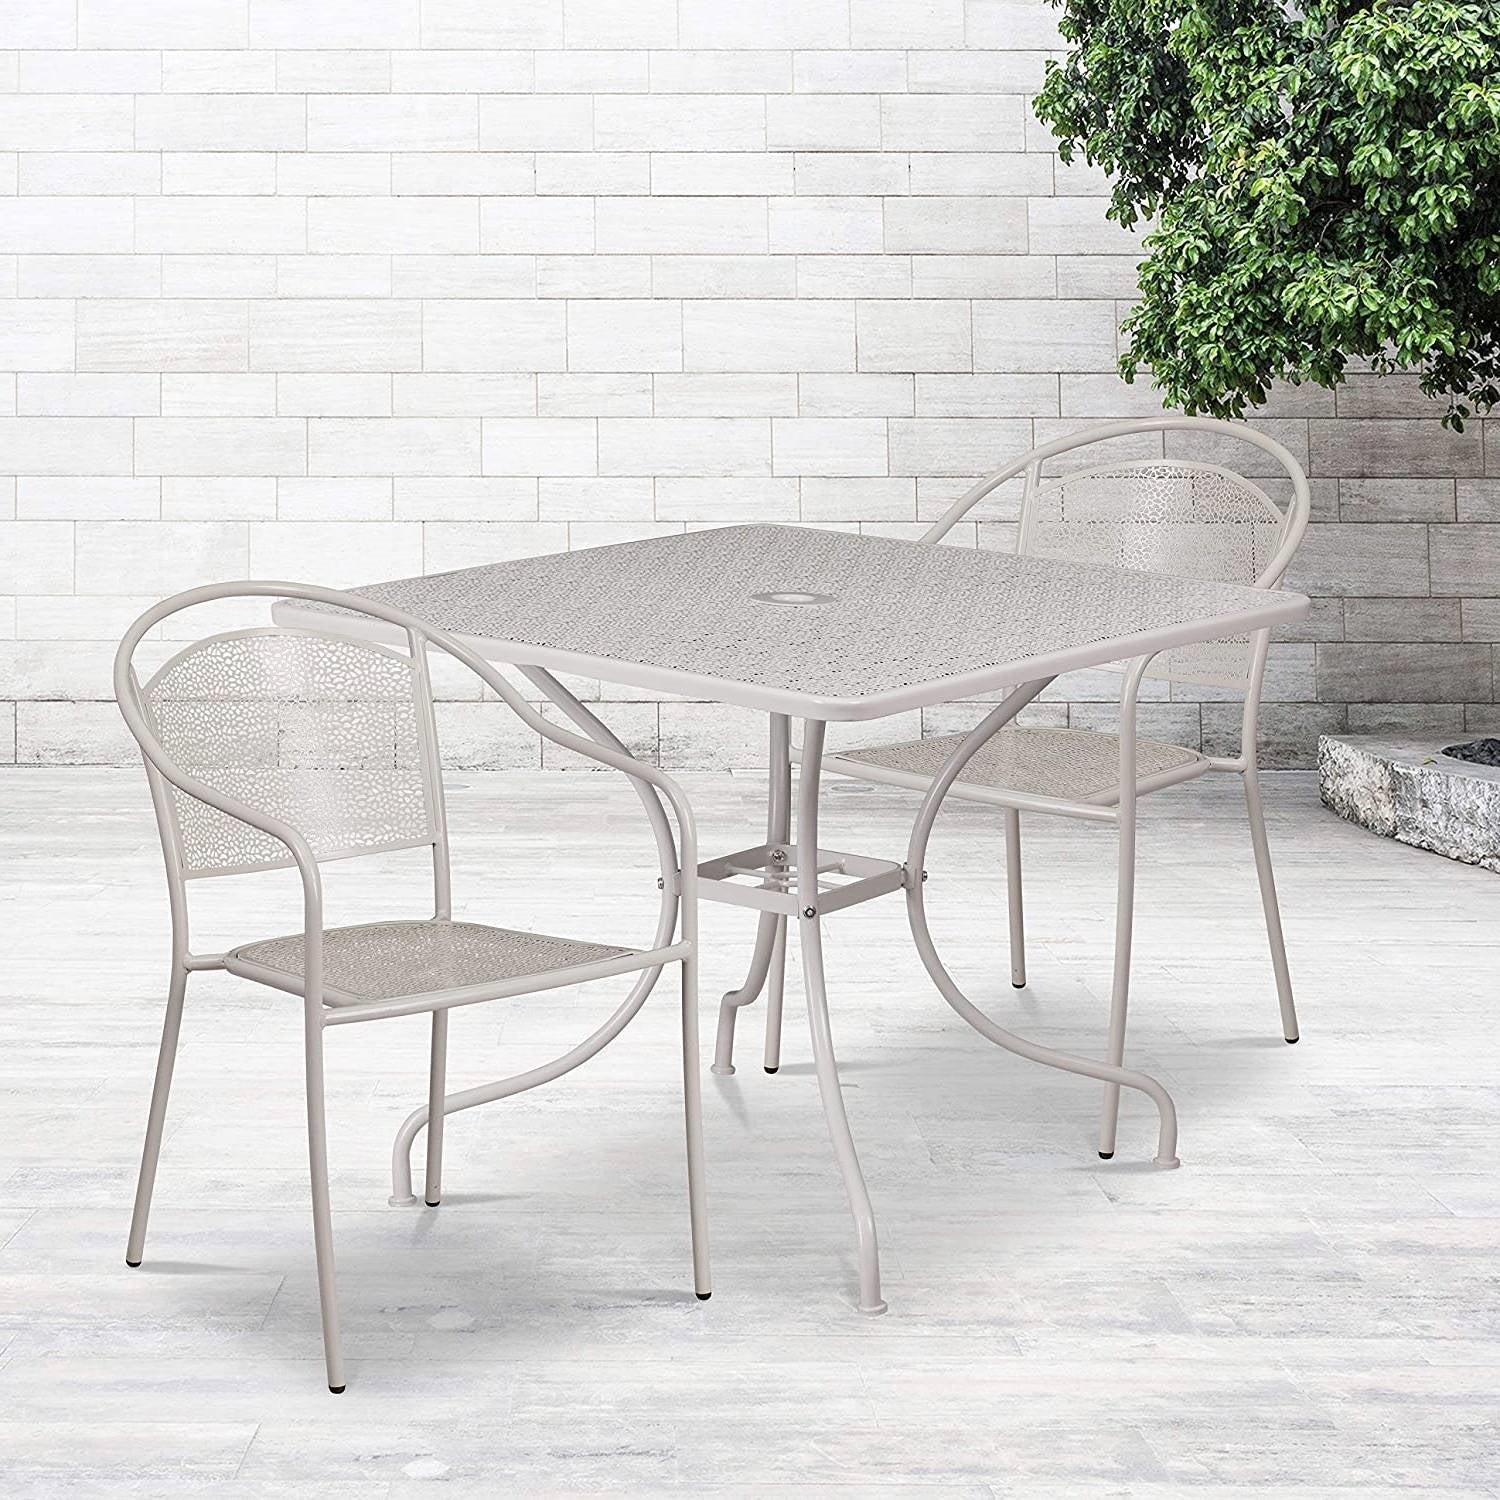 Outdoor > Outdoor Furniture > Patio Furniture Sets - 3-Piece Grey Steel Metal Outdoor Patio Furniture Set With 2 Chairs And 1 Table